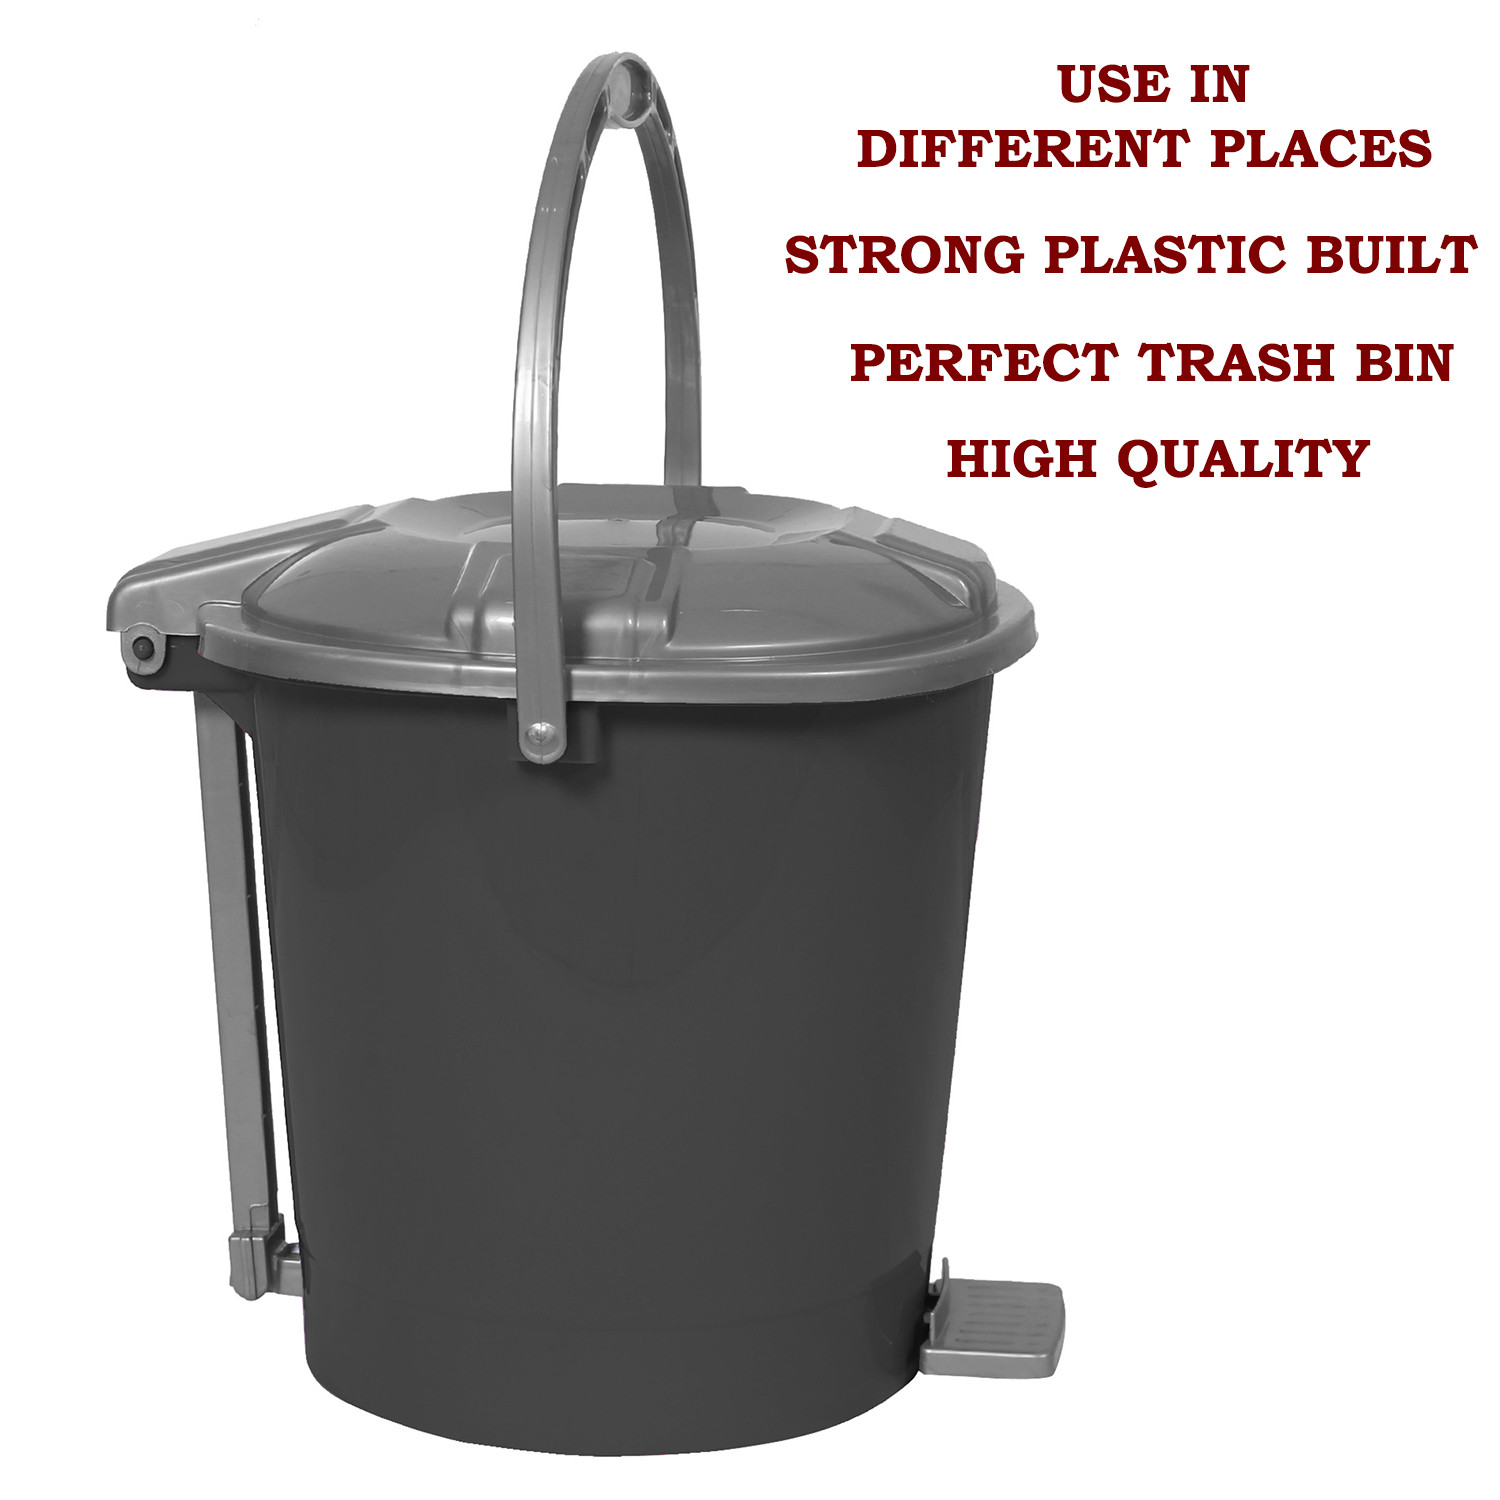 Kuber Industries Durable Plastic Pedal Dustbin|Waste Bin|Trash Can For Kitchen & Home With Handle,10 Litre,Pack of 2 (Gray & Red)